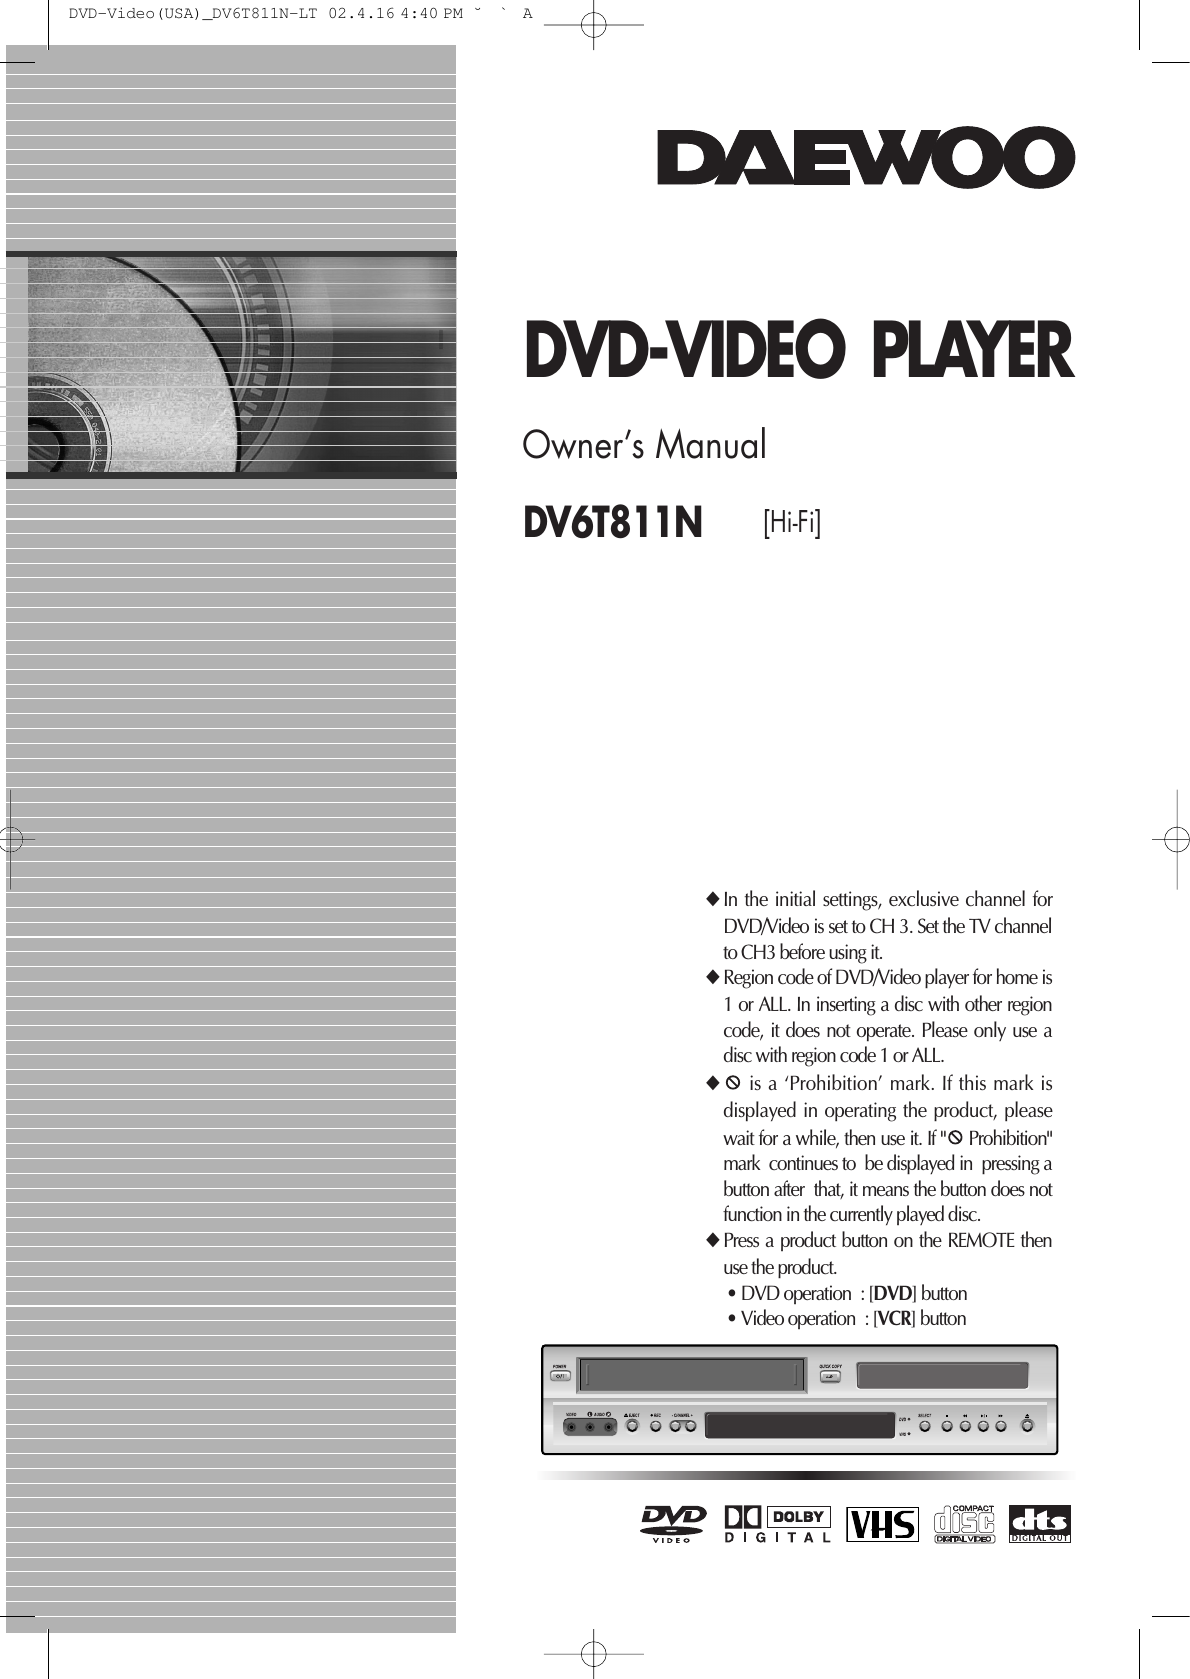 DV6T811N [Hi-Fi] DVD-VIDEO PLAYEROwner’s Manual◆In the initial settings, exclusive channel forDVD/Video is set to CH 3. Set the TV channelto CH3 before using it. ◆Region code of DVD/Video player for home is1 or ALL. In inserting a disc with other regioncode, it does not operate. Please only use adisc with region code 1 or ALL. ◆is a ‘Prohibition’ mark. If this mark isdisplayed in operating the product, pleasewait for a while, then use it. If &quot; Prohibition&quot;mark  continues to  be displayed in  pressing abutton after  that, it means the button does notfunction in the currently played disc.◆Press a product button on the REMOTE thenuse the product. • DVD operation  : [DVD] button • Video operation  : [VCR] button DVD-Video(USA)_DV6T811N-LT  02.4.16 4:40 PM  ˘`A